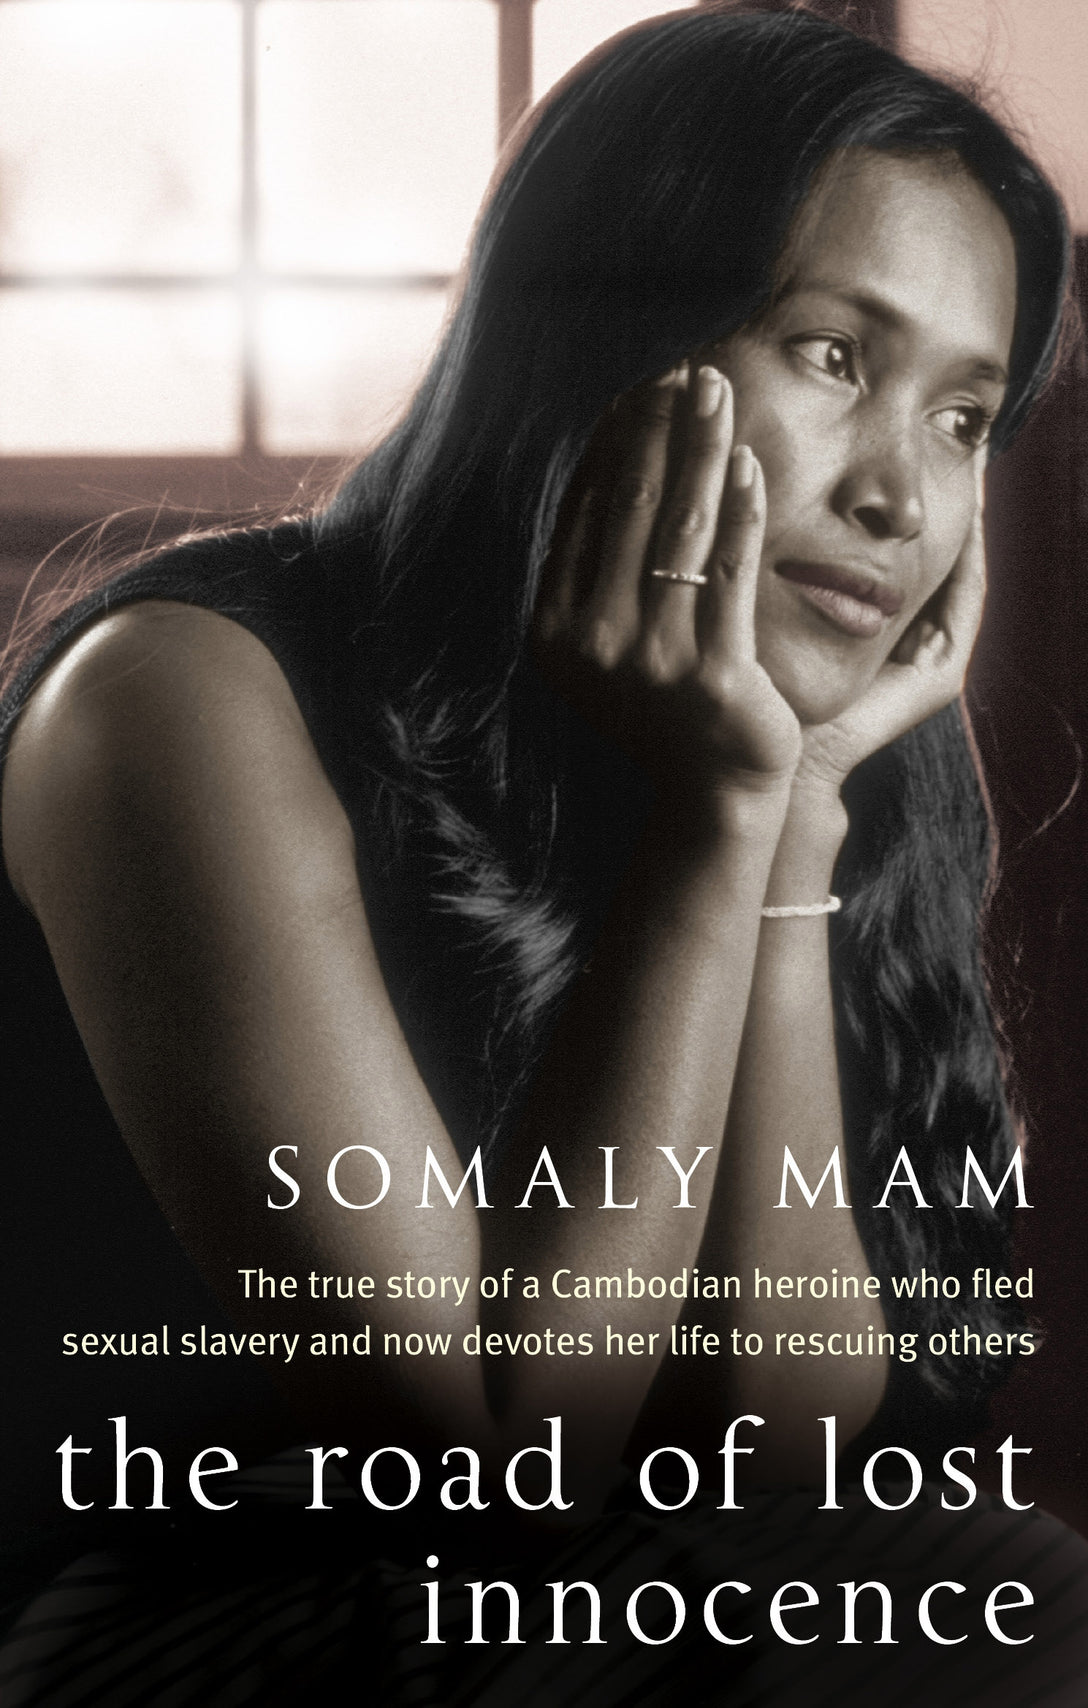 The Road Of Lost Innocence by Somaly Mam